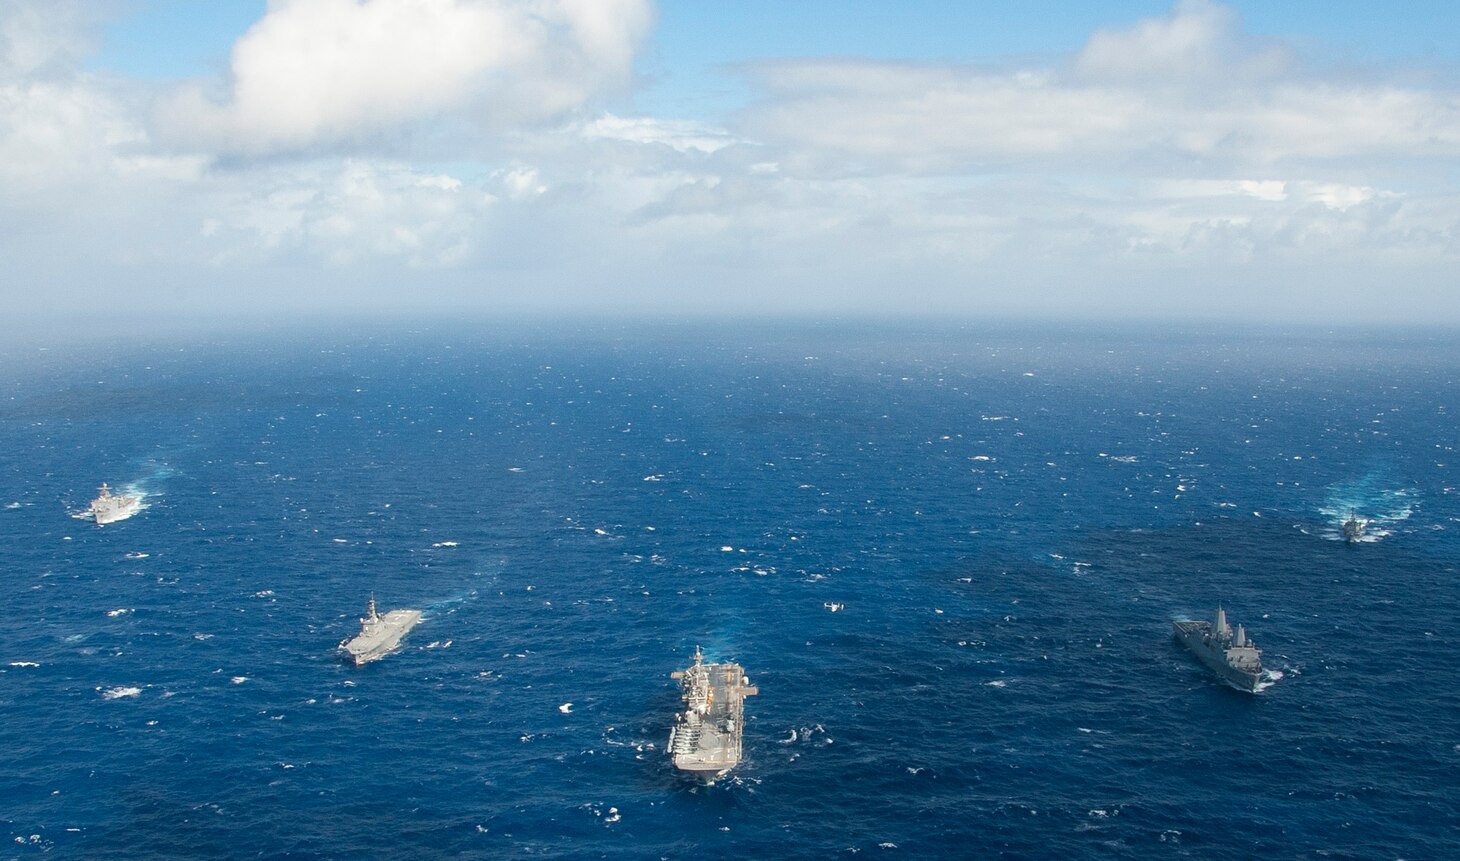 The amphibious assault ship USS Wasp (LHD 1), along with the transport dock ship USS Green Bay (LPD 20), dock landing ship USS Ashland (LSD 48), and Arleigh Burke class guided missile destroyer USS Shoup (DDG 86), sail alongside the Japan Maritime Self Defense Force (JMSDF) amphibious transport dock ship JS Osumi (LST 4001) during a Passing Exercise (PASSEX) in the Philippine Sea Aug. 26, 2018. PASSEX enabled the Wasp Amphibious Ready Group and the JMSDF a chance to practice communications and maneuvering procedures. The Wasp ARG is currently operating in the region to enhance interoperability with partners and serve as a ready-response force for any type of contingency.